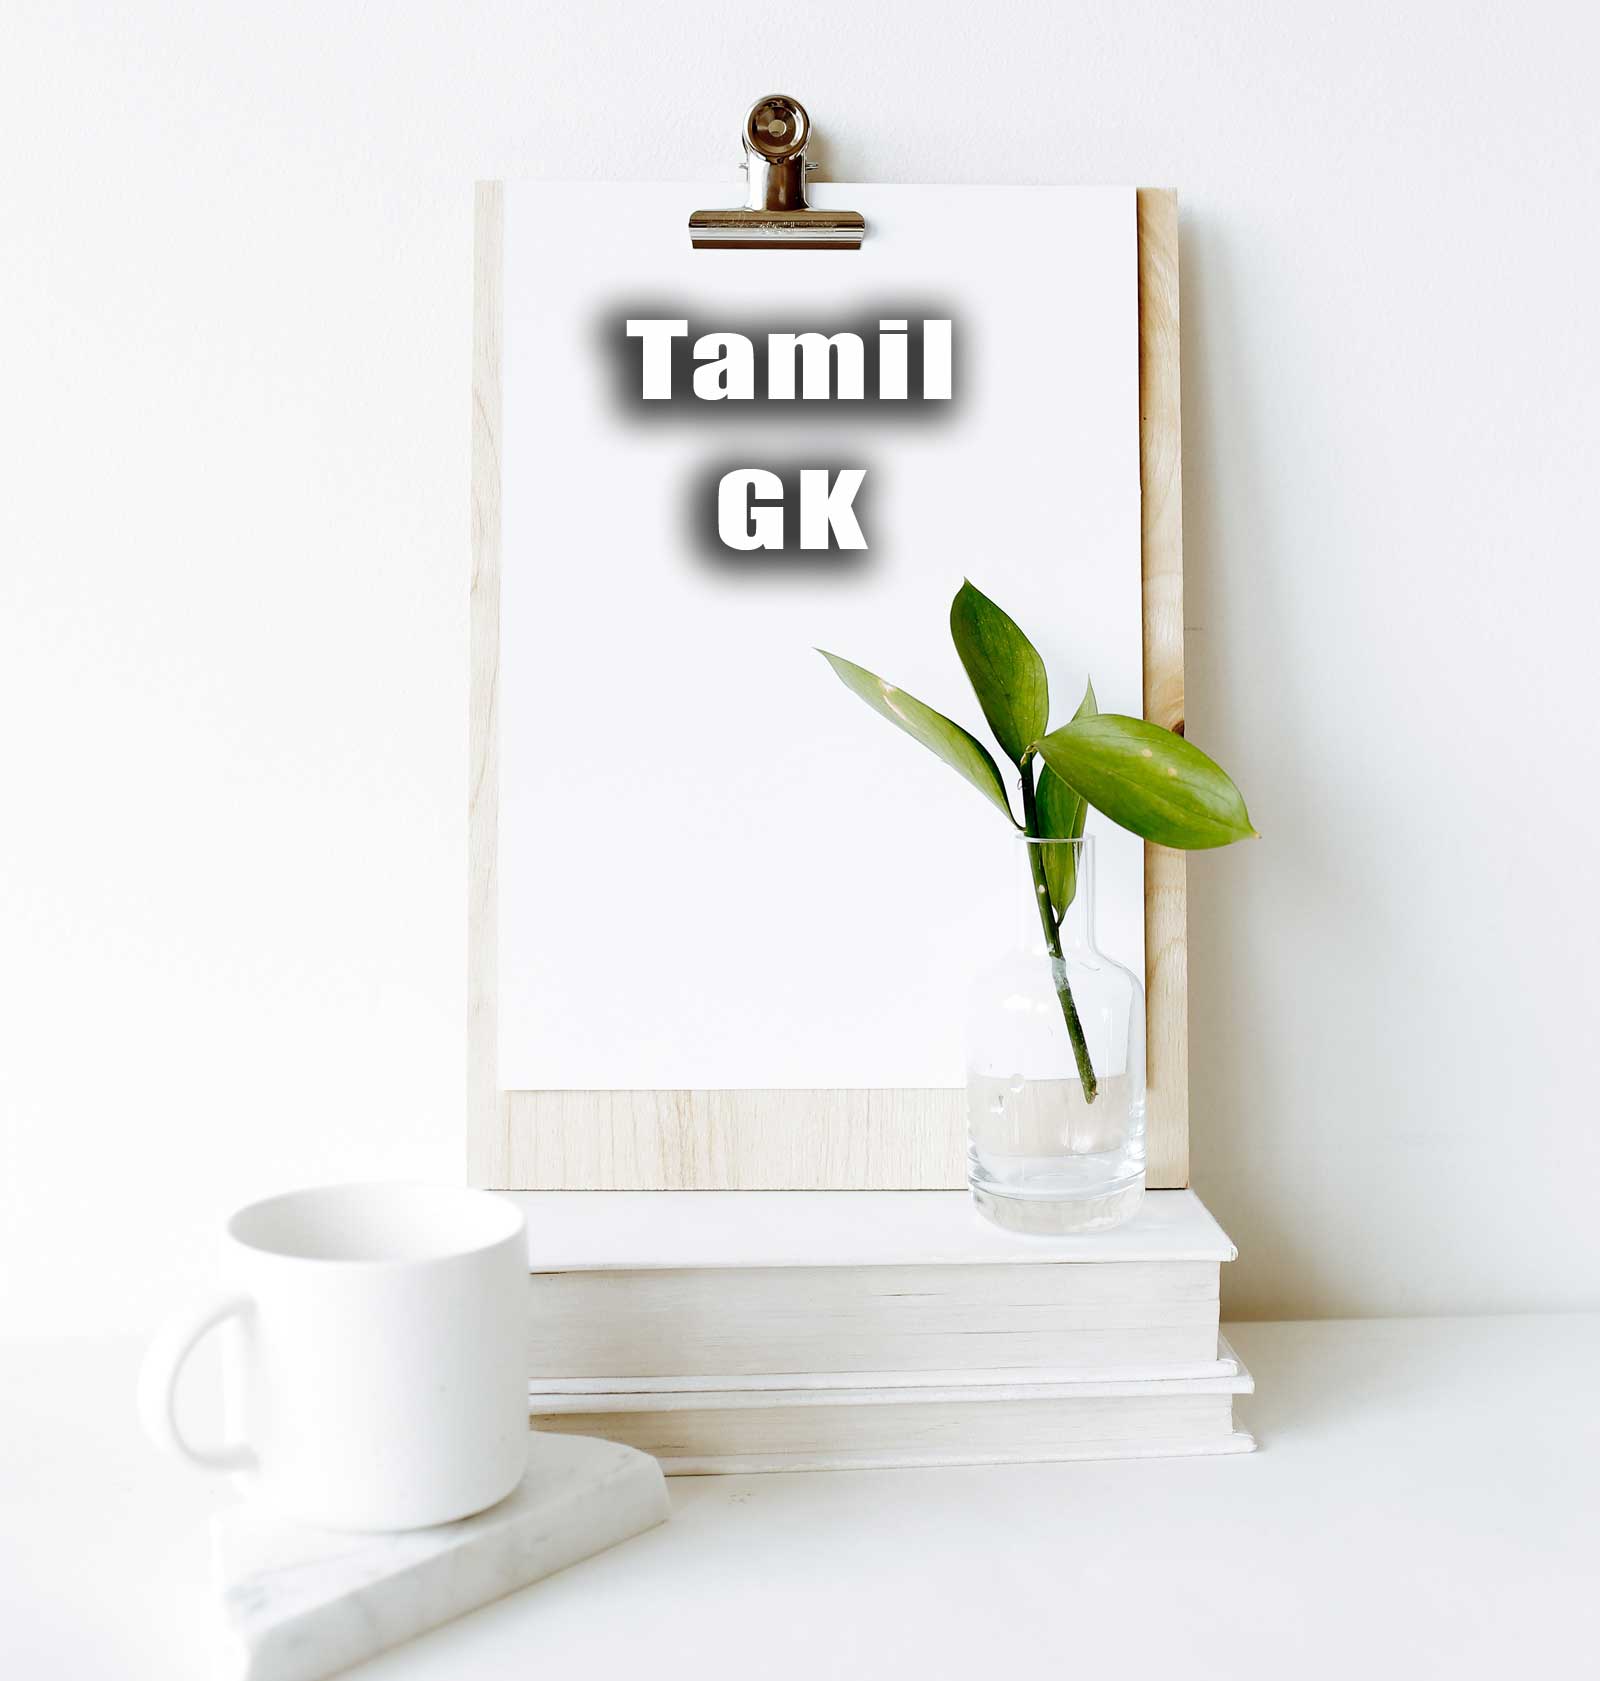 Tamil GK Selected Questions and Answers